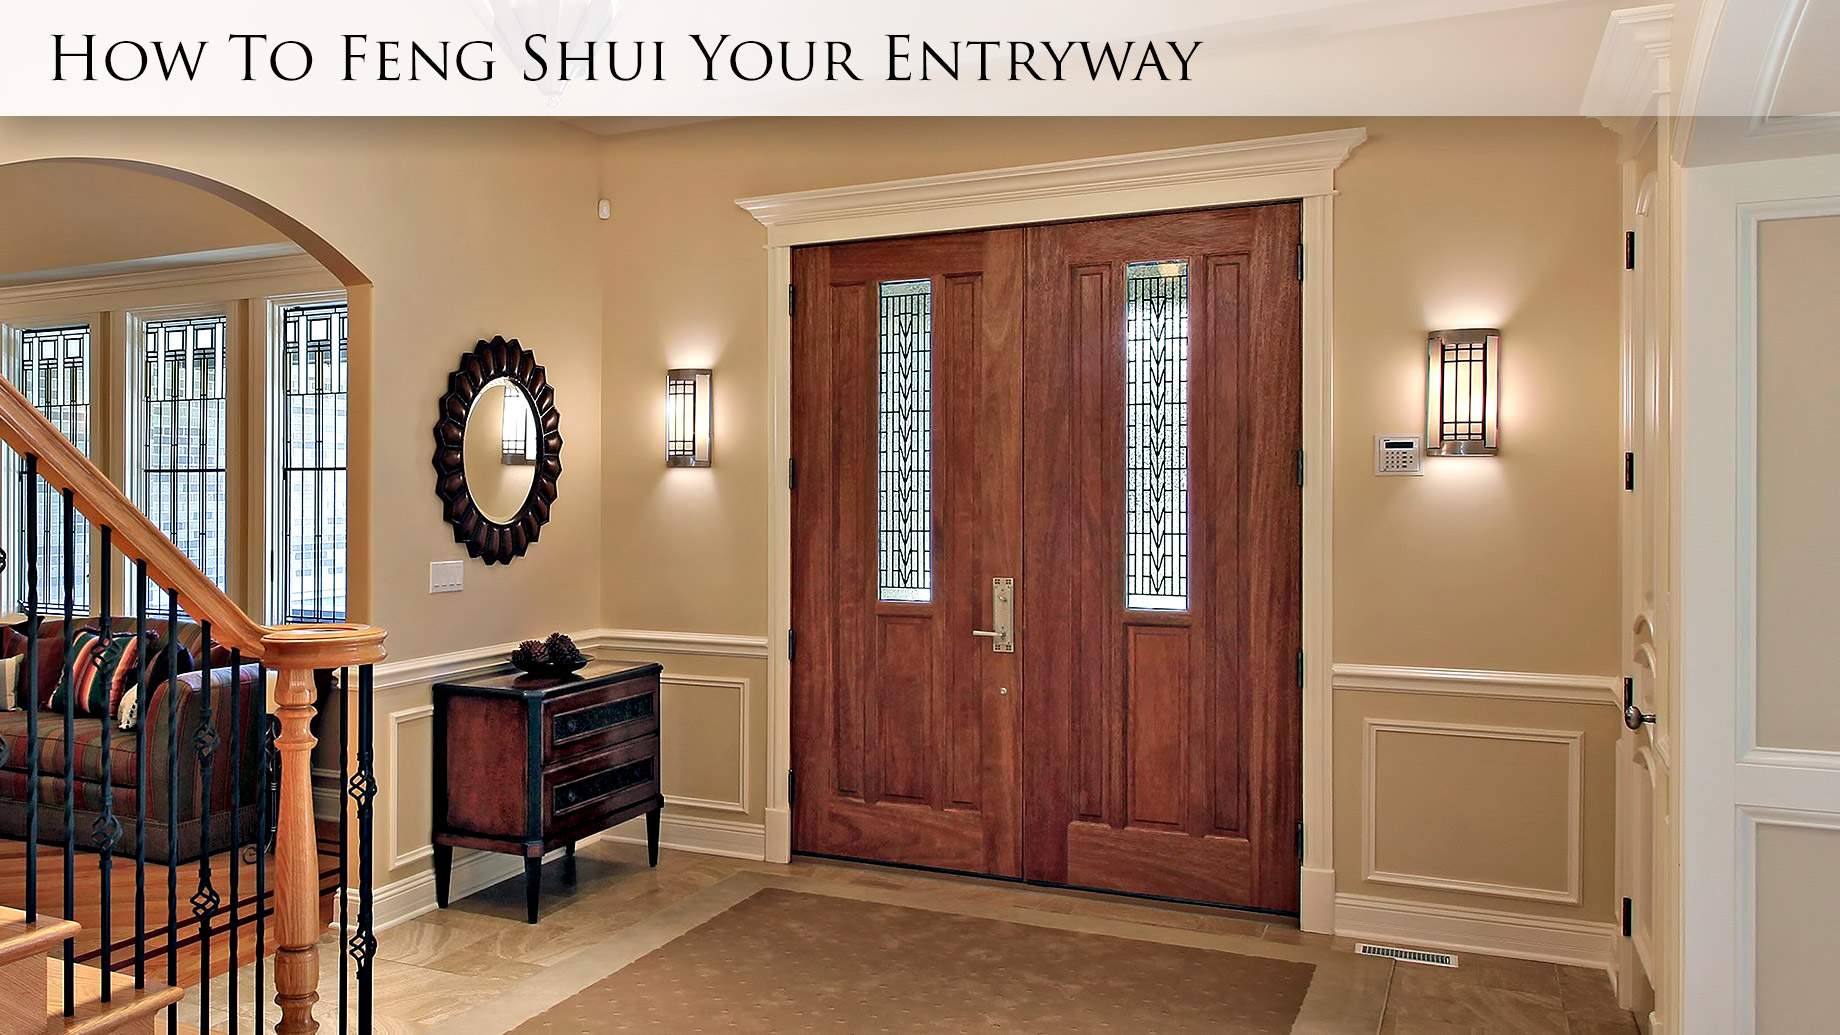 5 Feng Shui entryway mistakes that are ruining your home – and the ways to dodge them